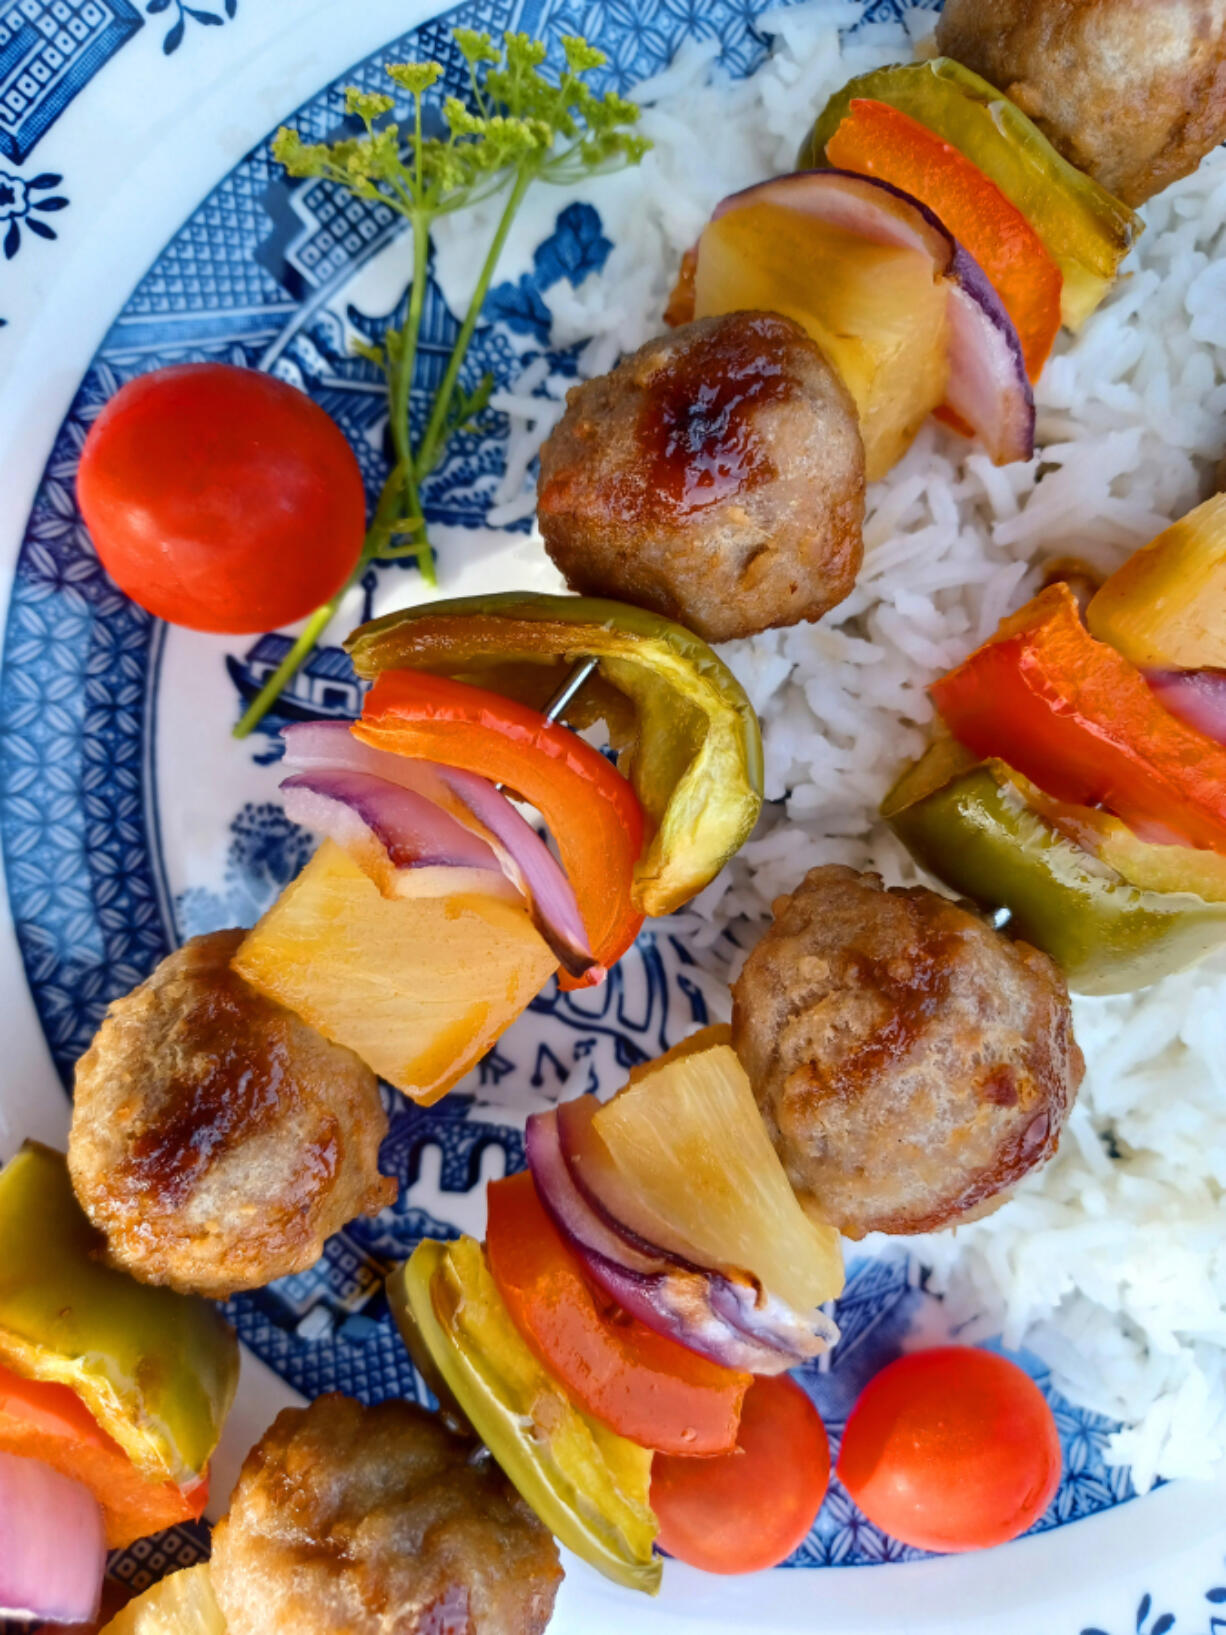 These teriyaki meatball skewers are as fun to make as they are to eat.